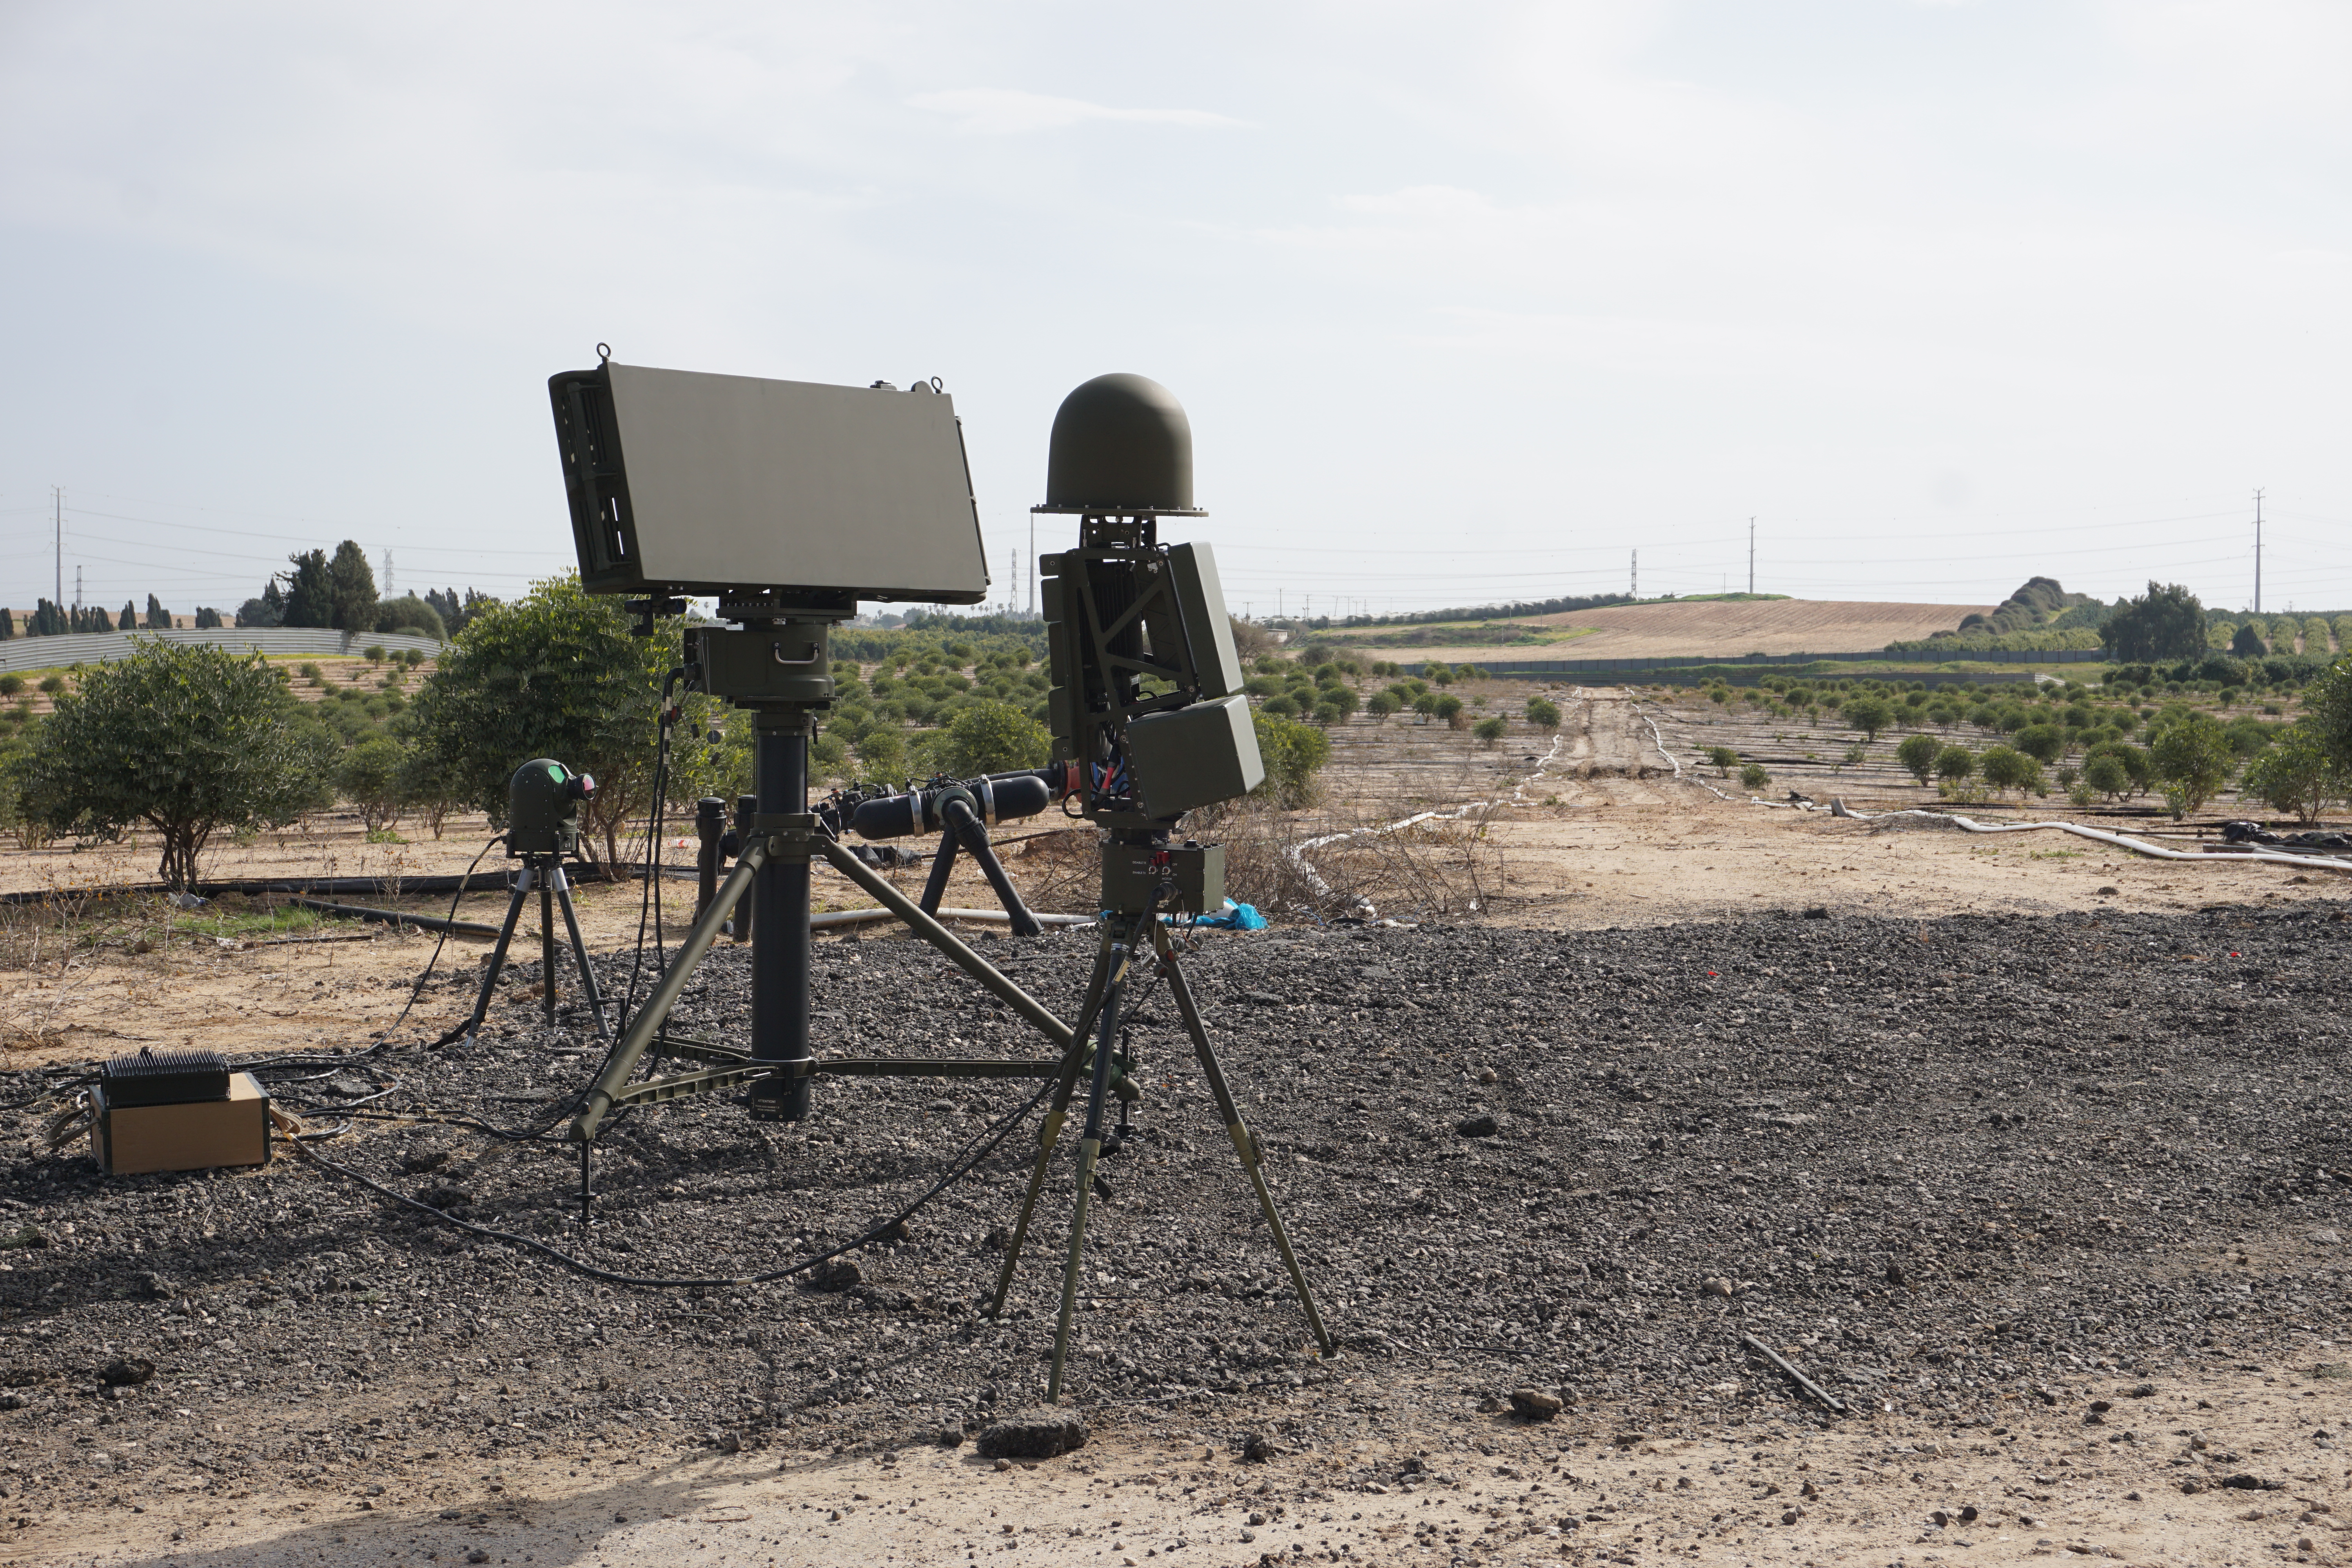 Who is buying Israeli counter-drone systems in South